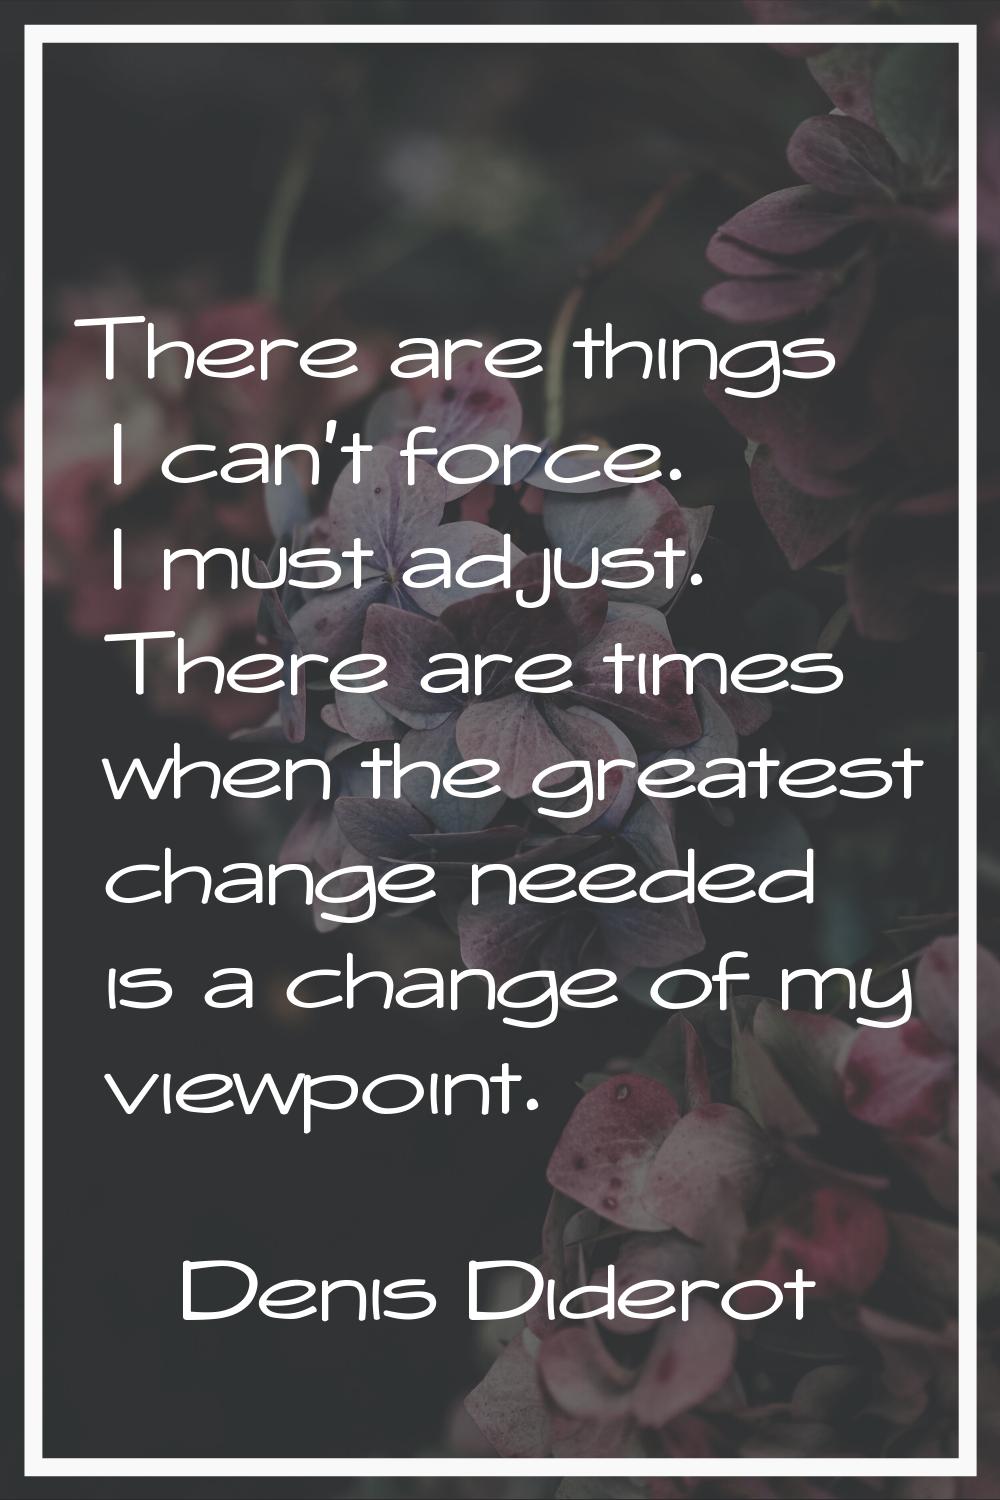 There are things I can't force. I must adjust. There are times when the greatest change needed is a